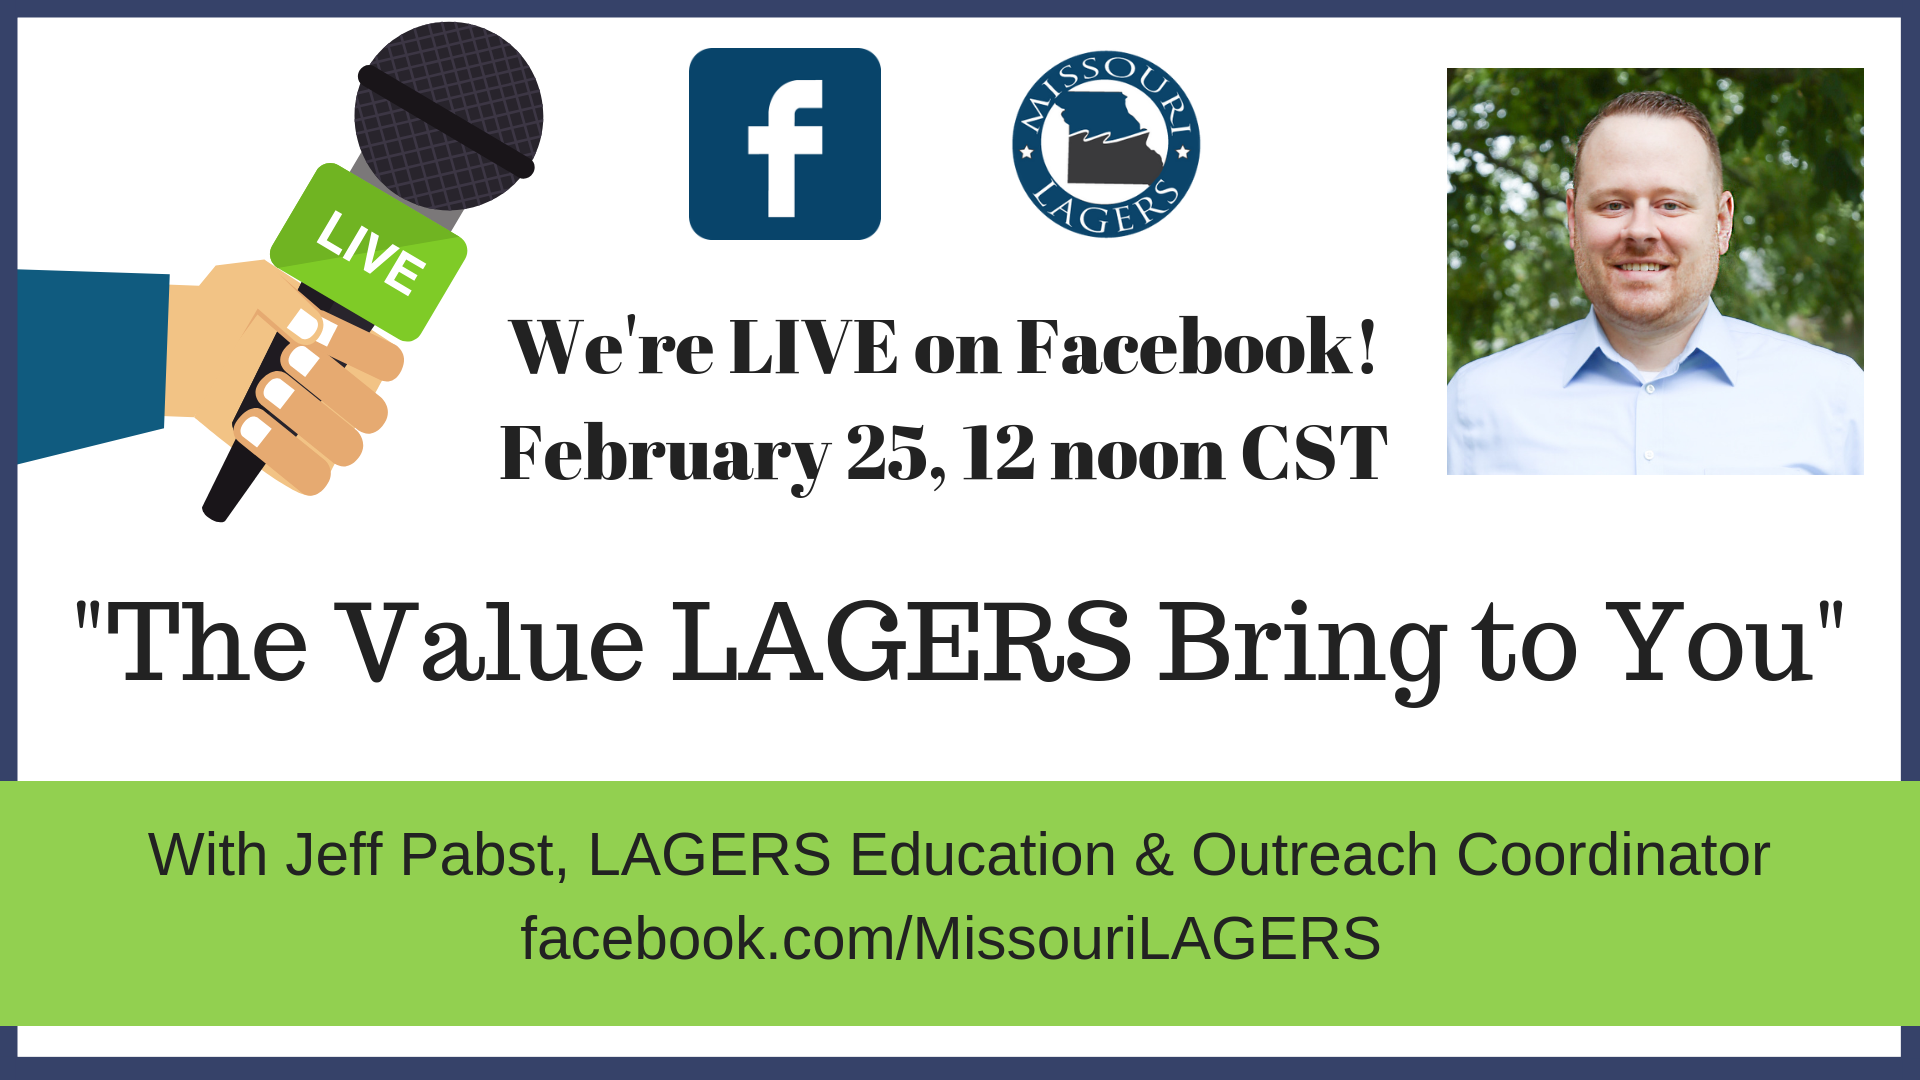 Facebook Live - "The Value LAGERS Brings to You"